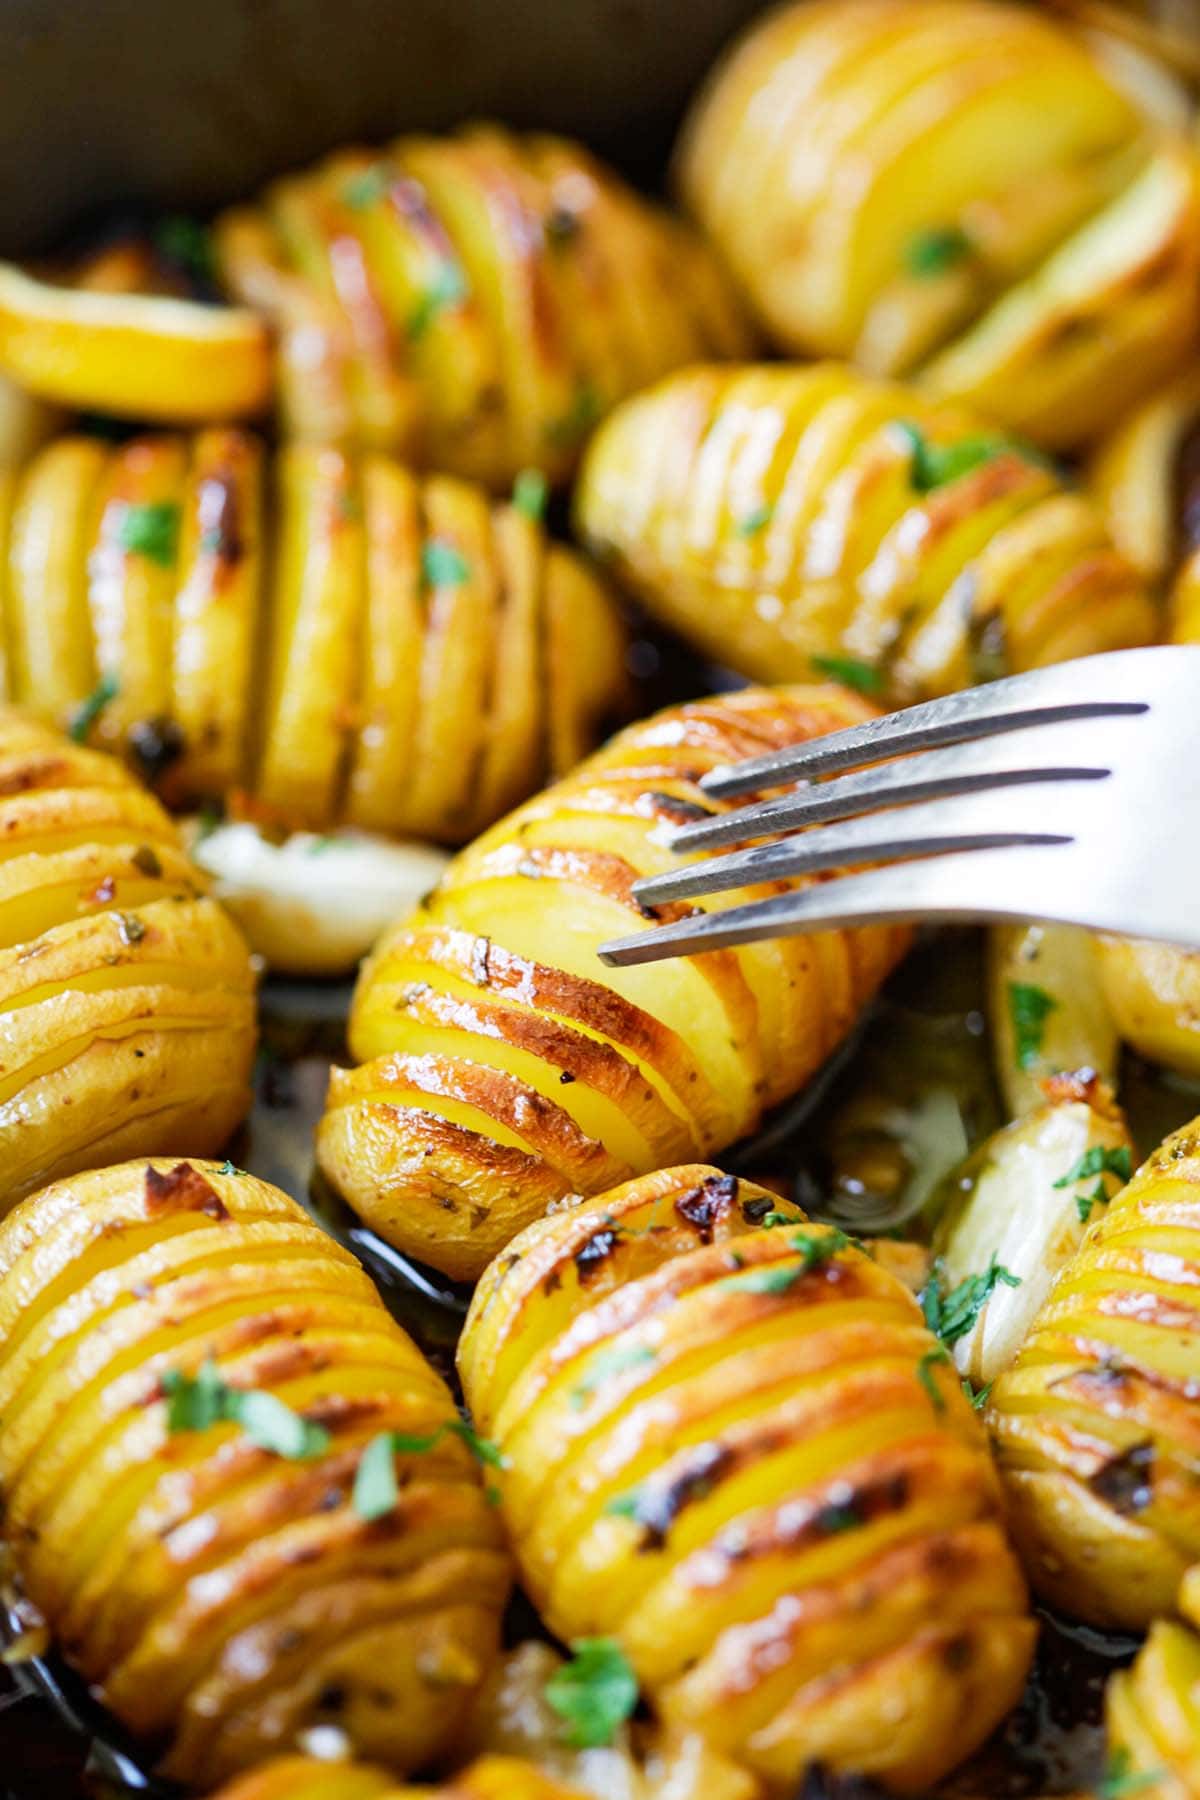 A fork delicately piercing through  oven-roasted golden-brown crust potatoes coated with lemon, garlic, and herbs.